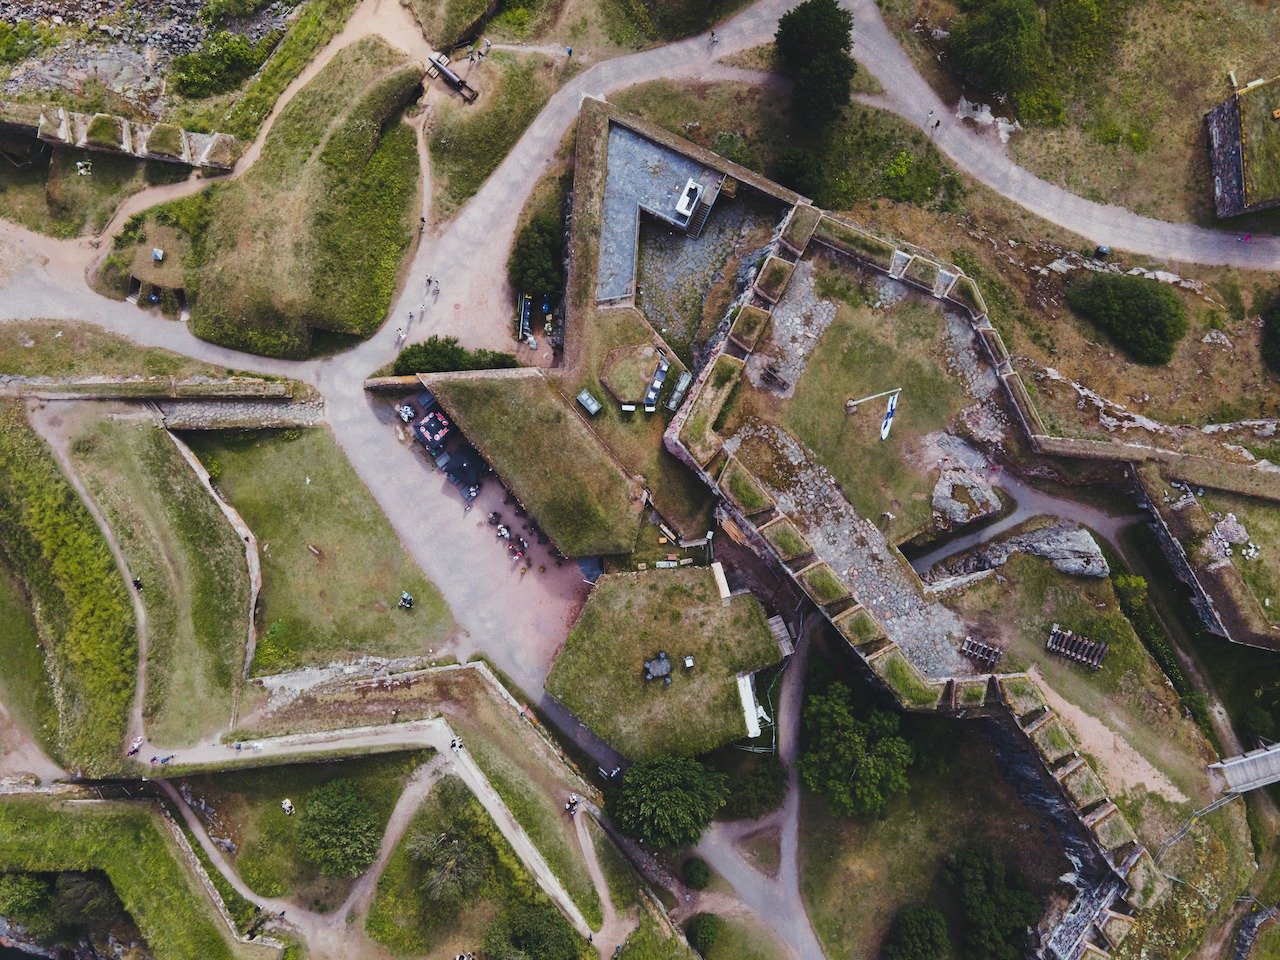 📍 Suomenlinna, Helsinki, Finland

A top down view of a fortification on the fortress island of Suomenlinna. You can take a cheap and short ferry ride to this set of islands, go to the grocery store near the ferry stop, pick up some food, and have yo